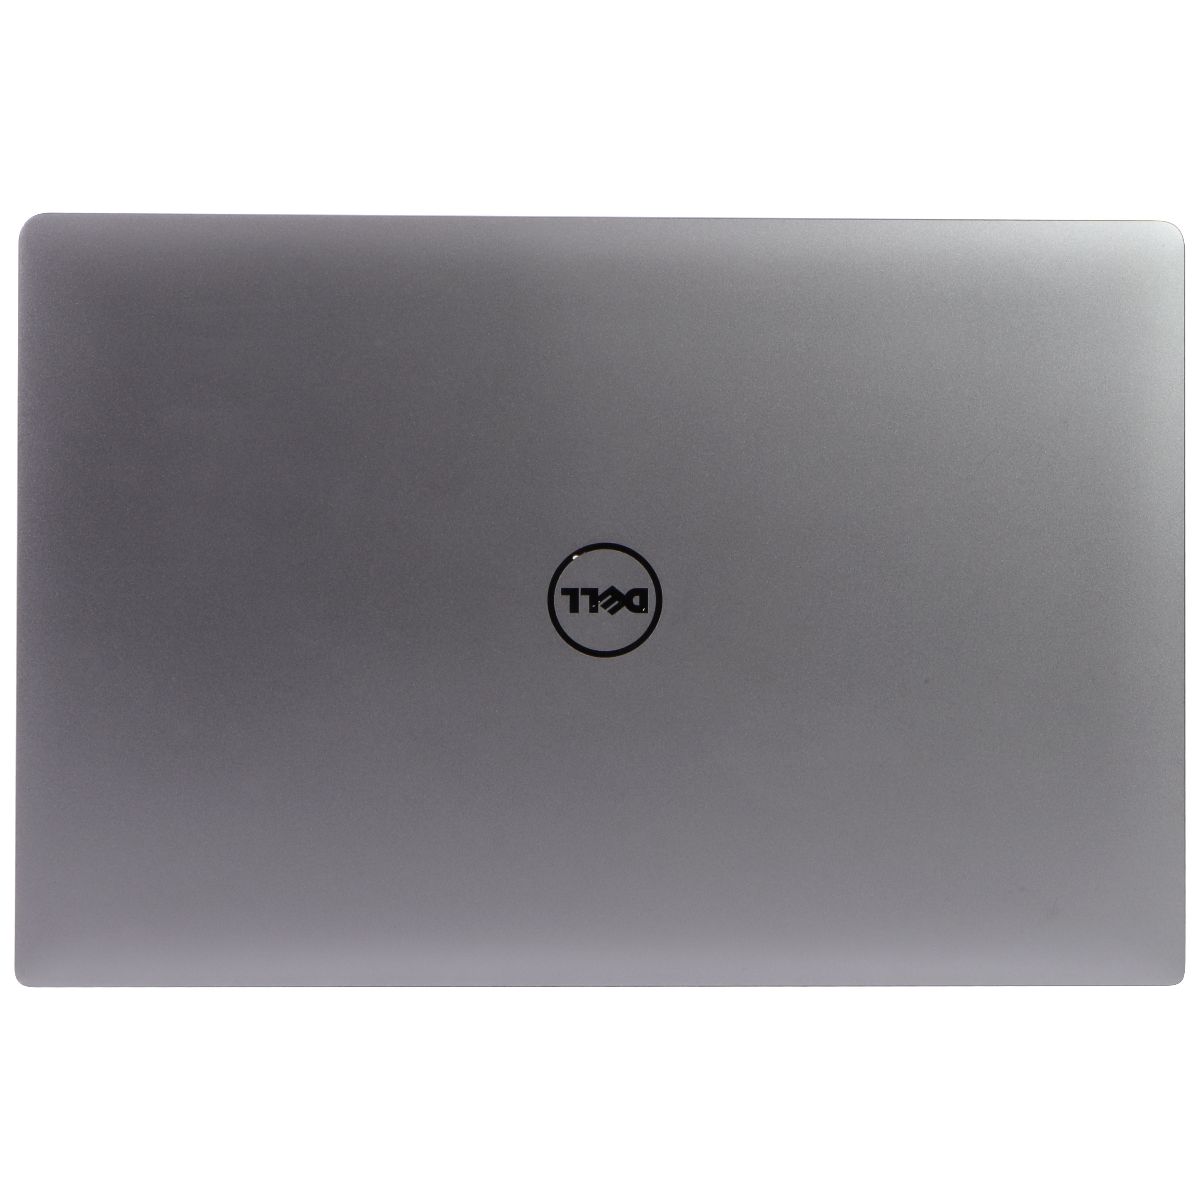 Dell Precision 5520 (15.6-in) Laptop (P56F) i7-7820HQ / 256 SSD/8GB/10 Home Laptops - PC Laptops & Netbooks Dell    - Simple Cell Bulk Wholesale Pricing - USA Seller